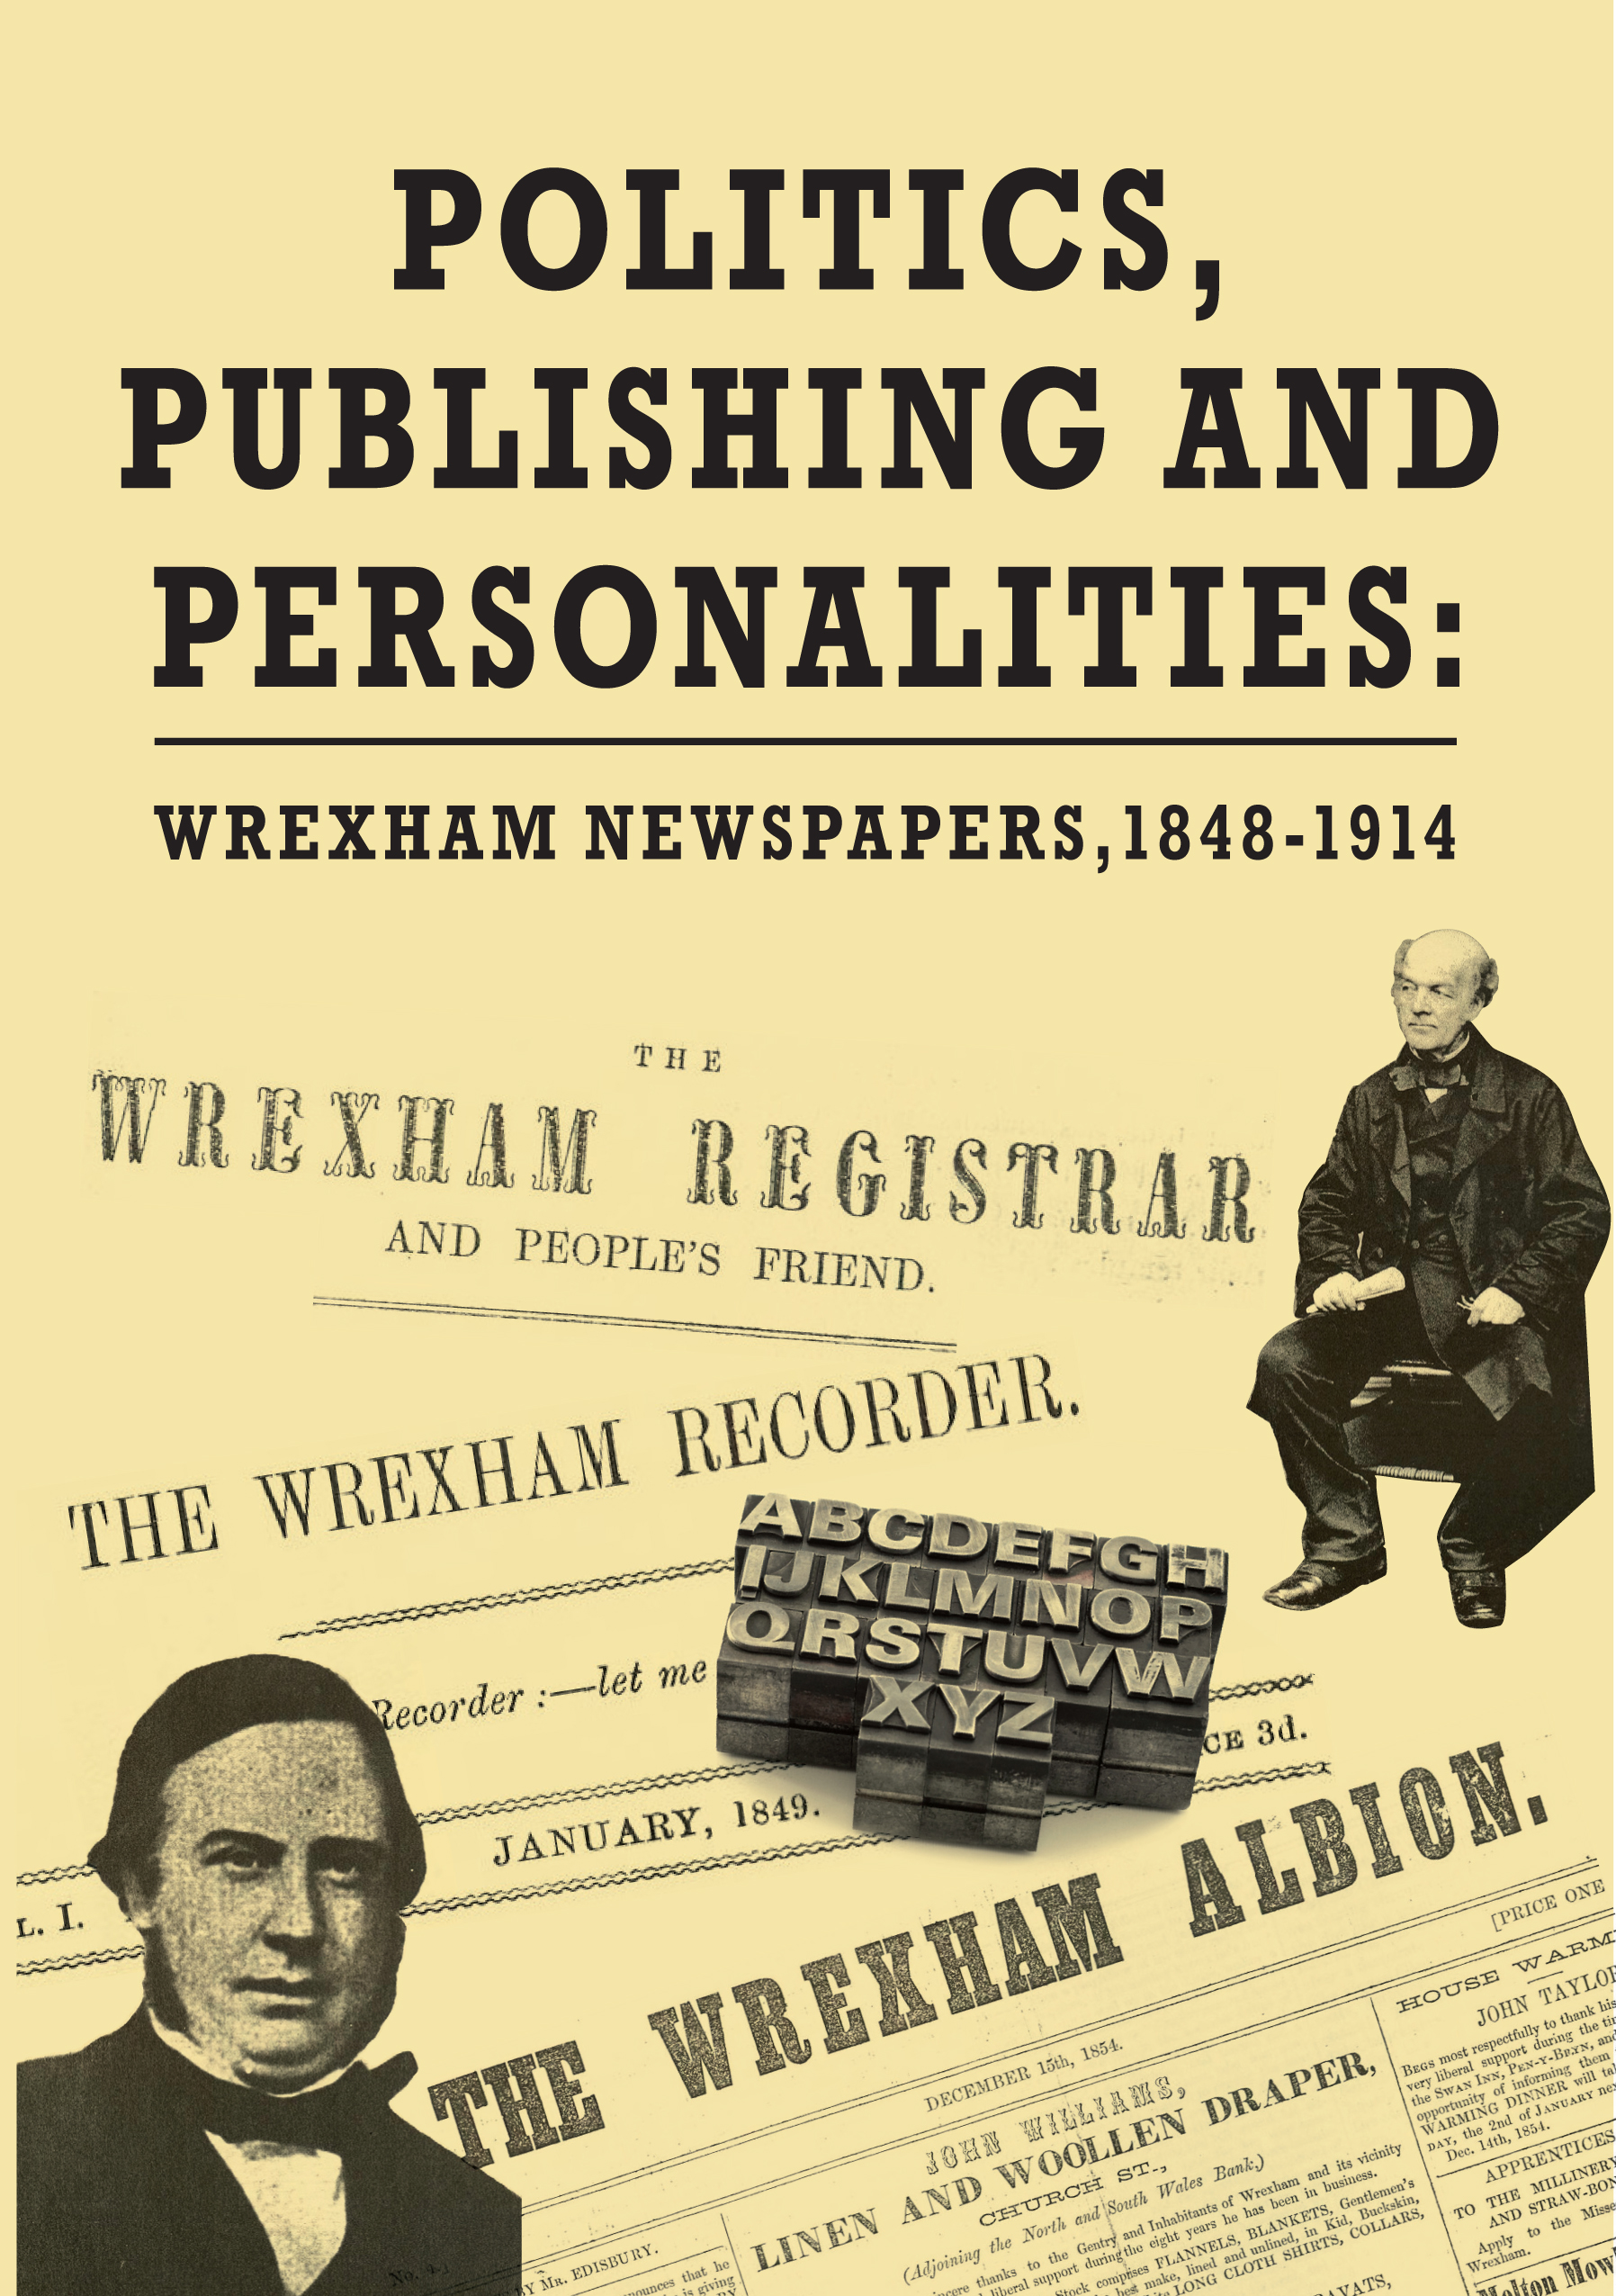 Politics, Publishing and Personalities: Wrexham Newspapers 1848-1914